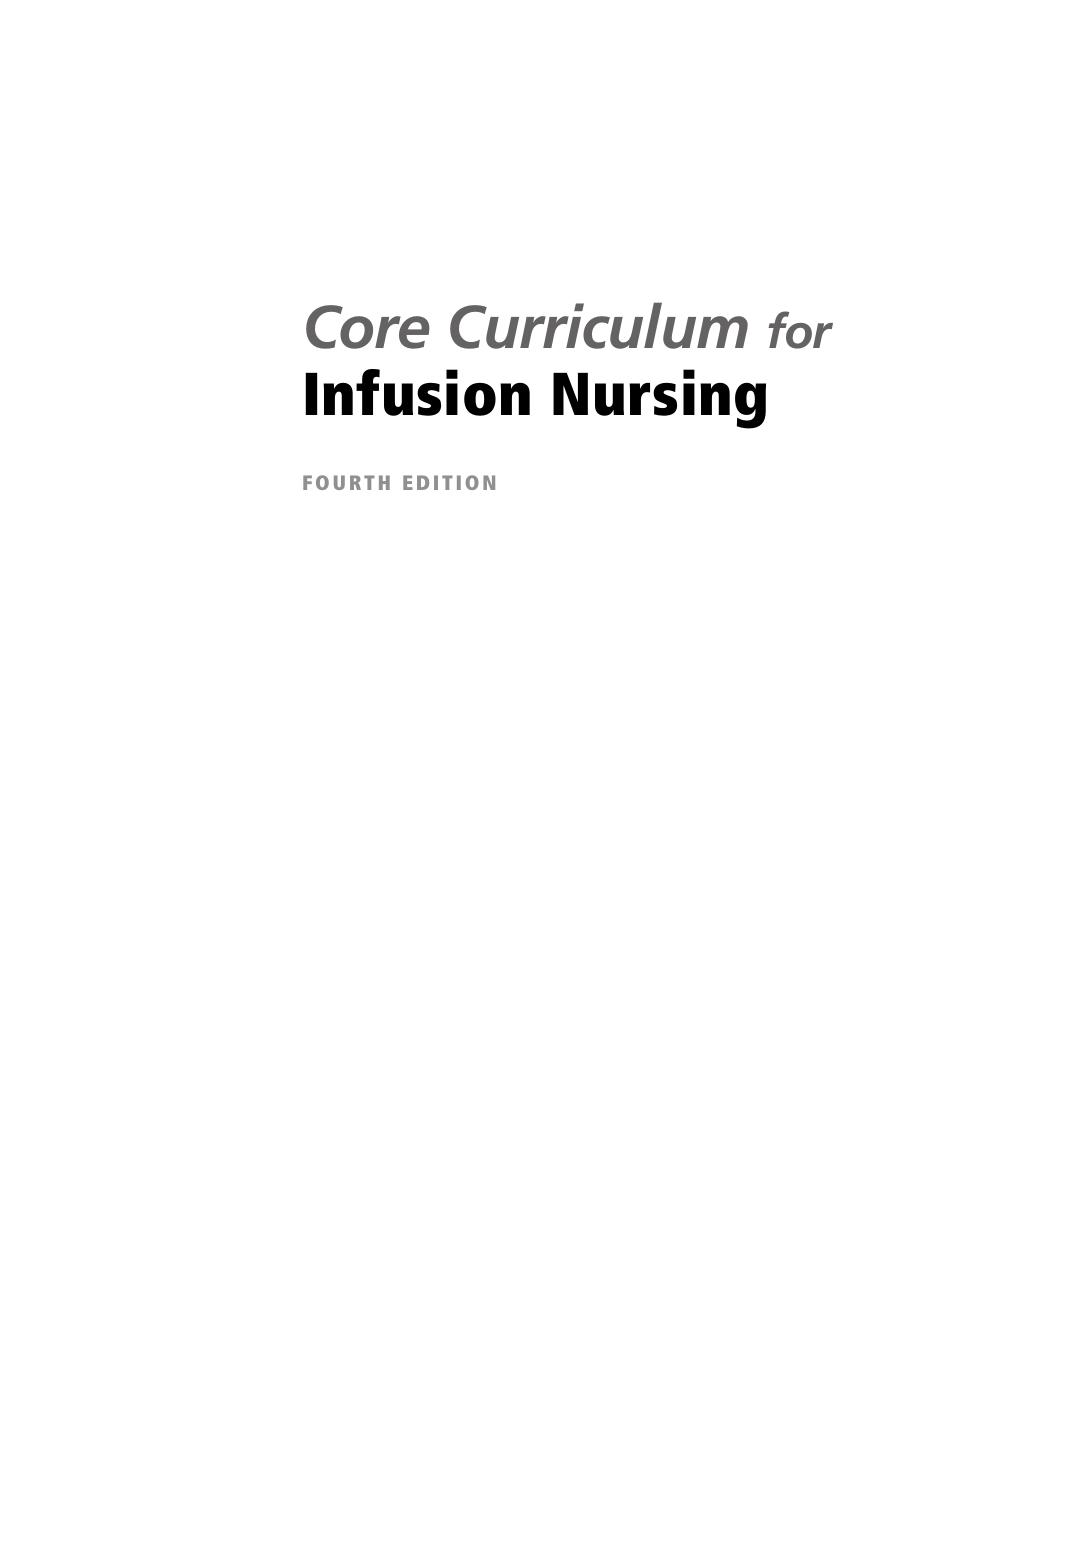 Core Curriculum for Infusion Nursing (4th Edition).jpg